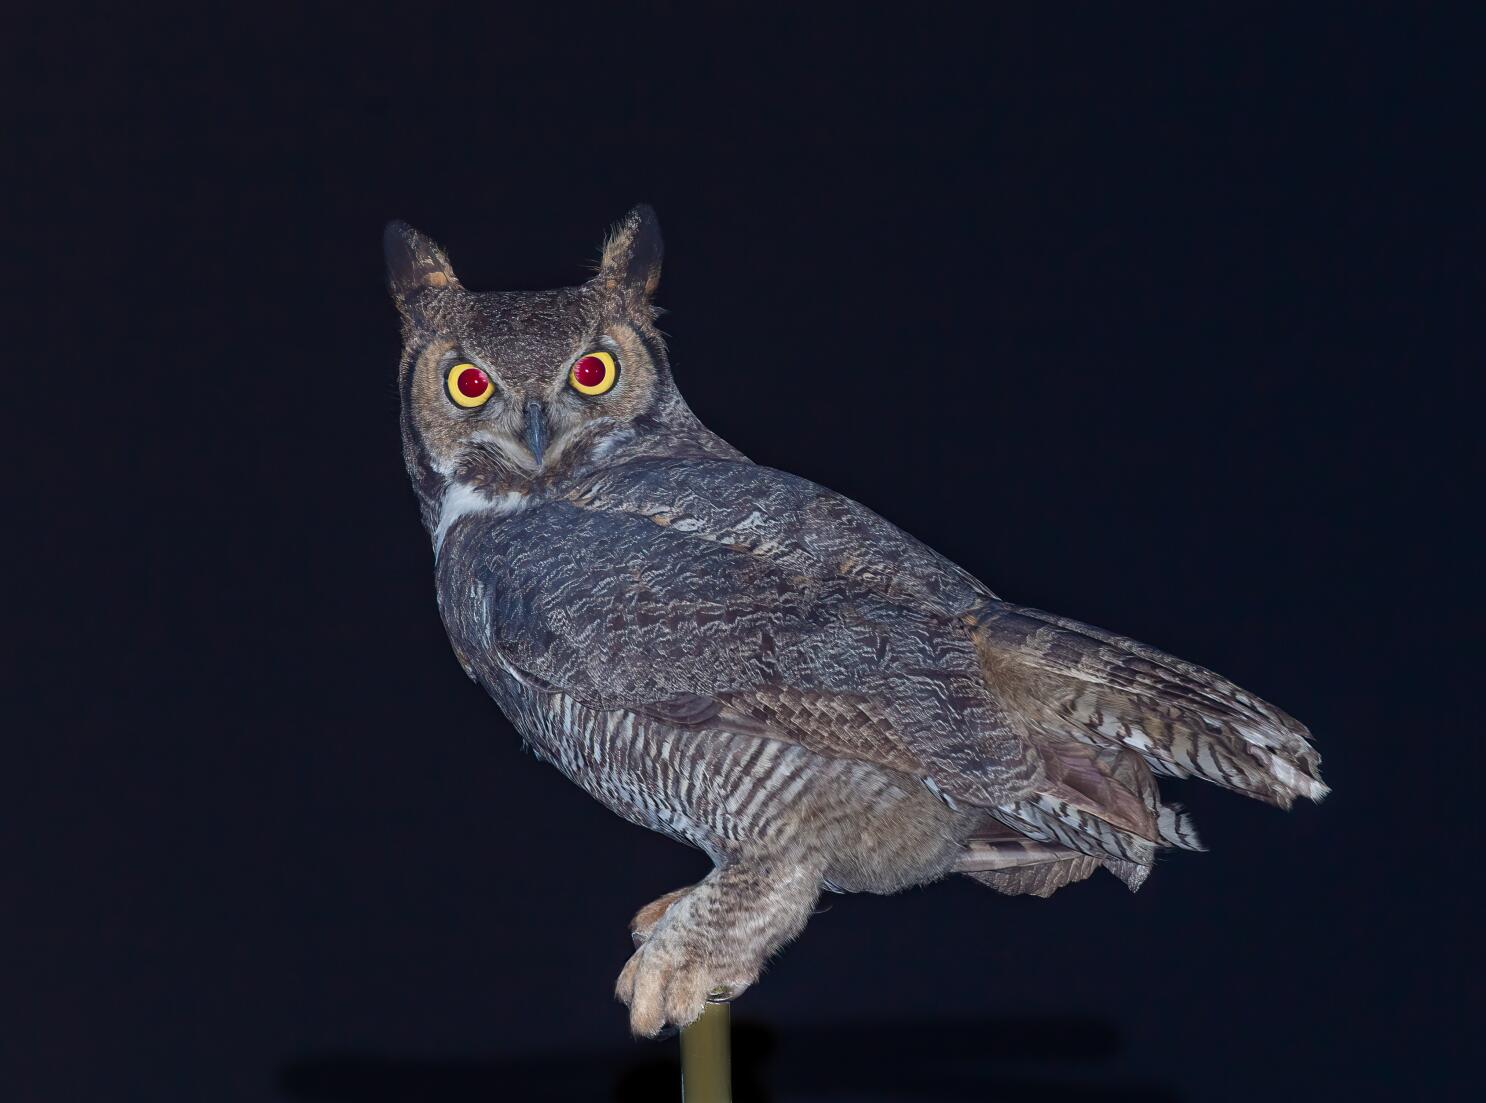 The hooting past. Re-evaluating the role of owls in shaping human